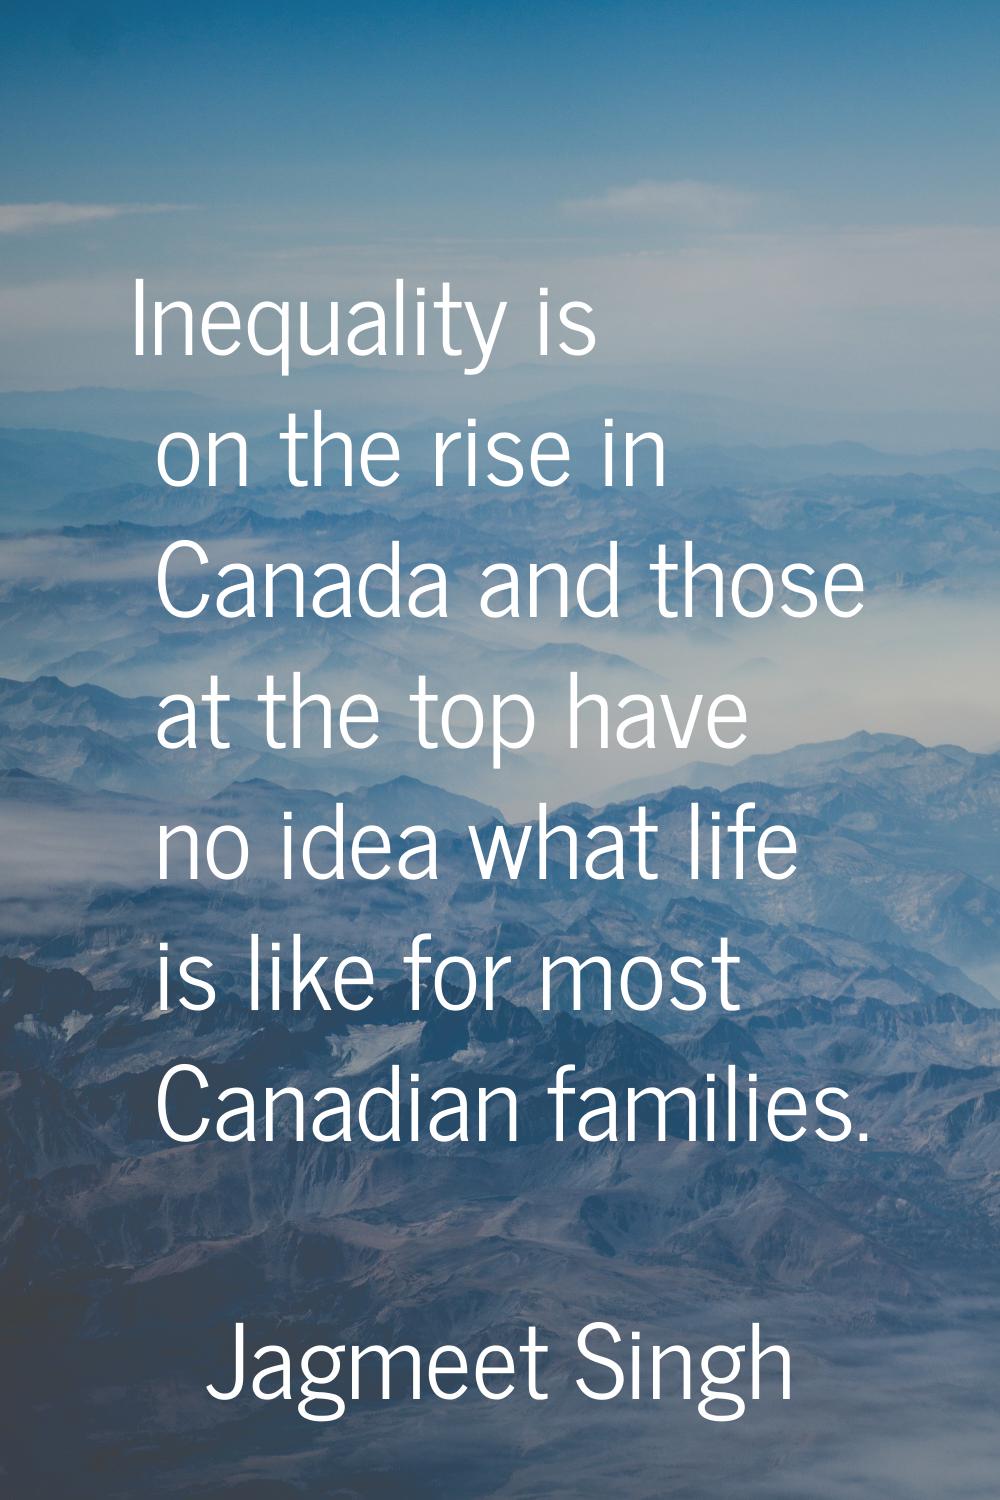 Inequality is on the rise in Canada and those at the top have no idea what life is like for most Ca